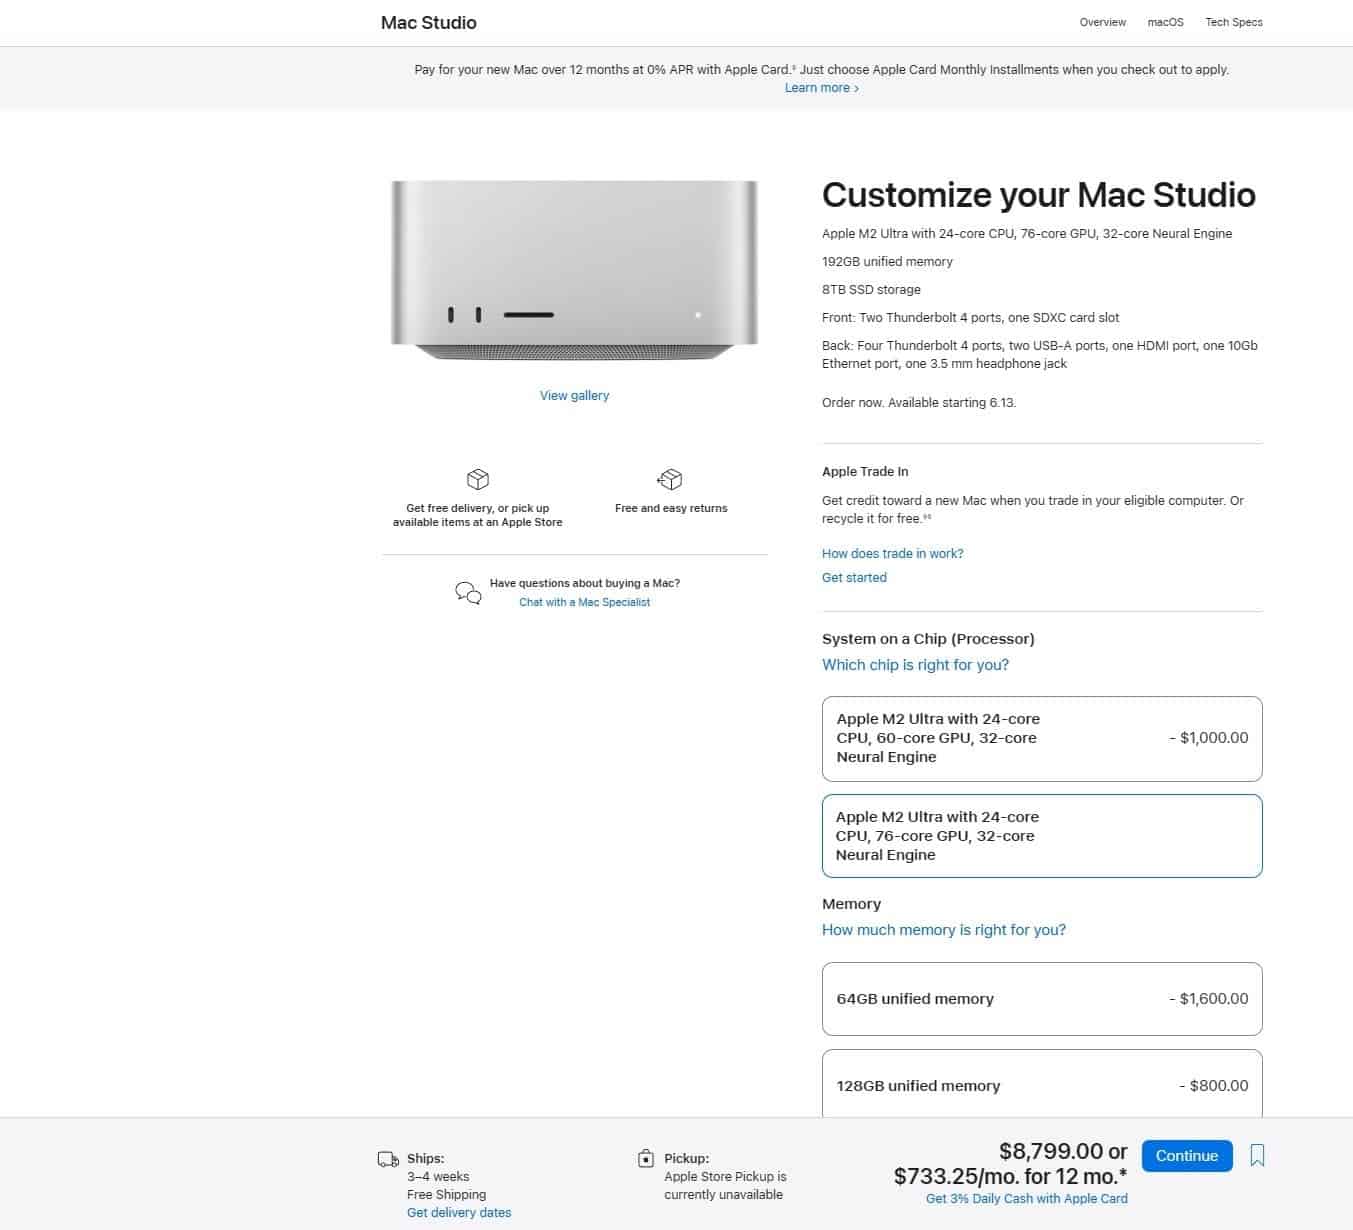 Mac Studio: Should You Buy? Features, Price, Reviews and More